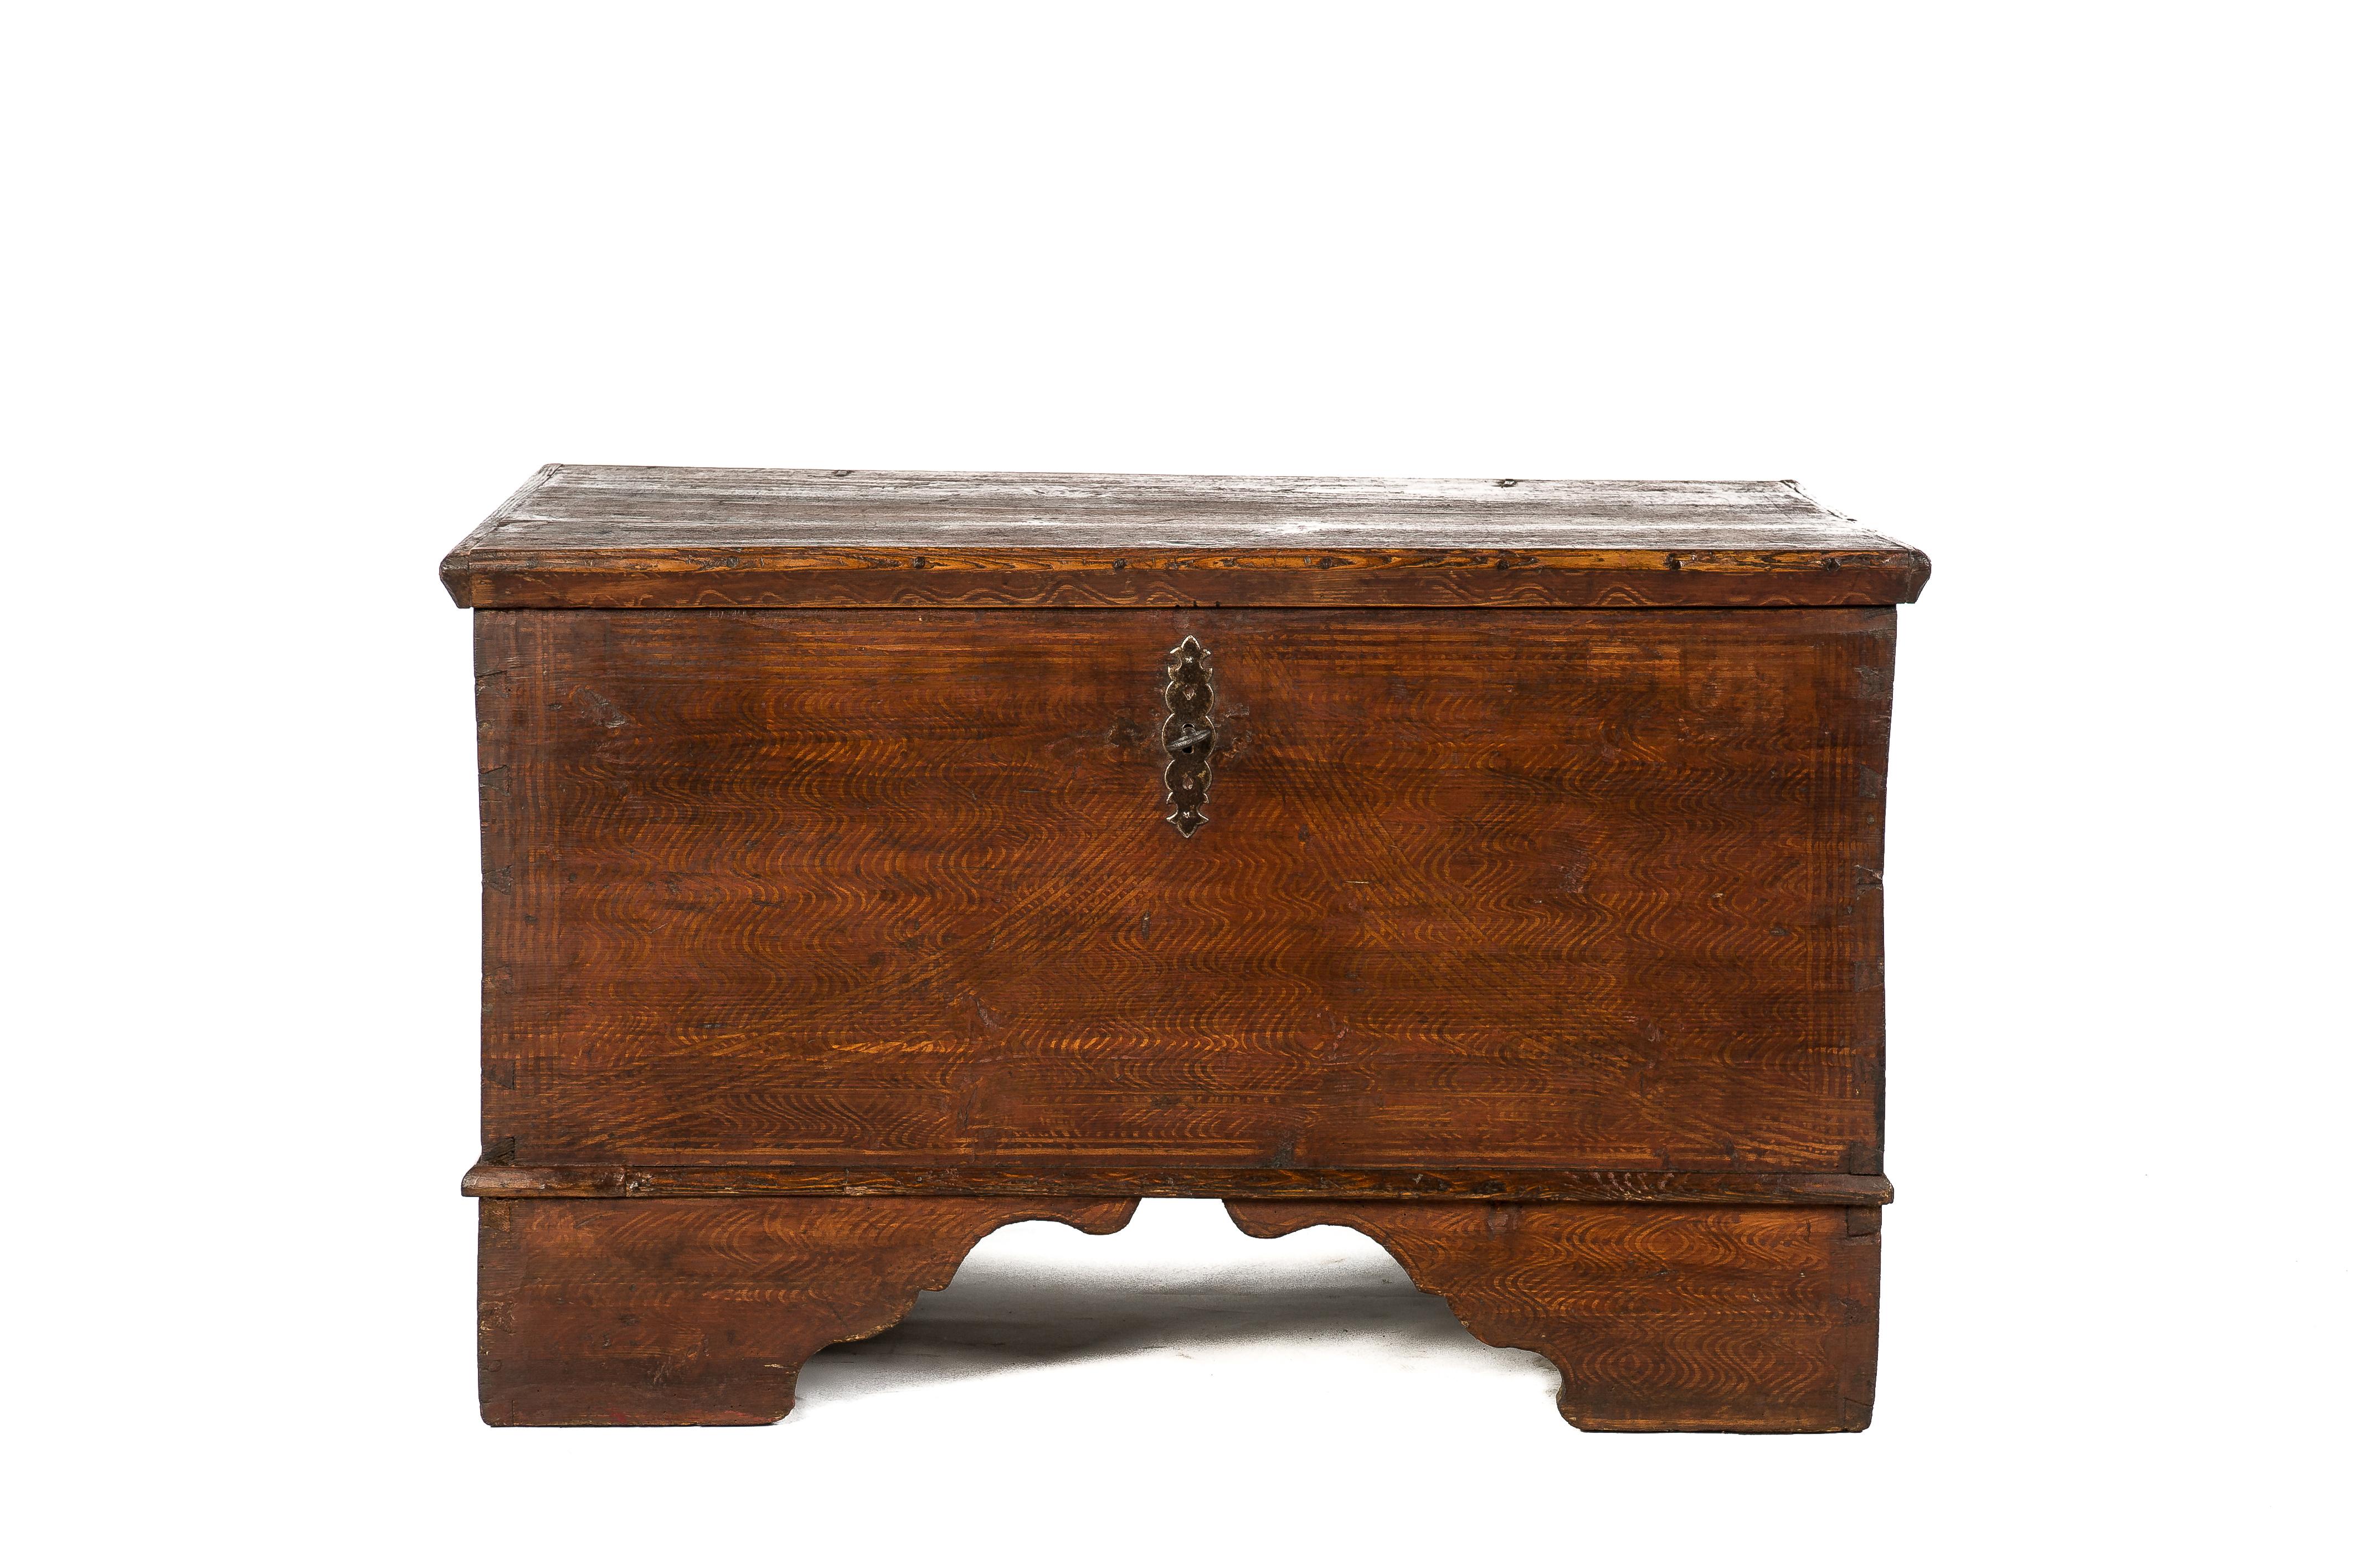 This beautiful trunk or blanket chest was made in Austria and is dated 1888. The brick red decorative wave pattern paint is authentic to the piece. The chest is elevated on bracket feet and is equipped with the original hinges, keyplate, lock, and